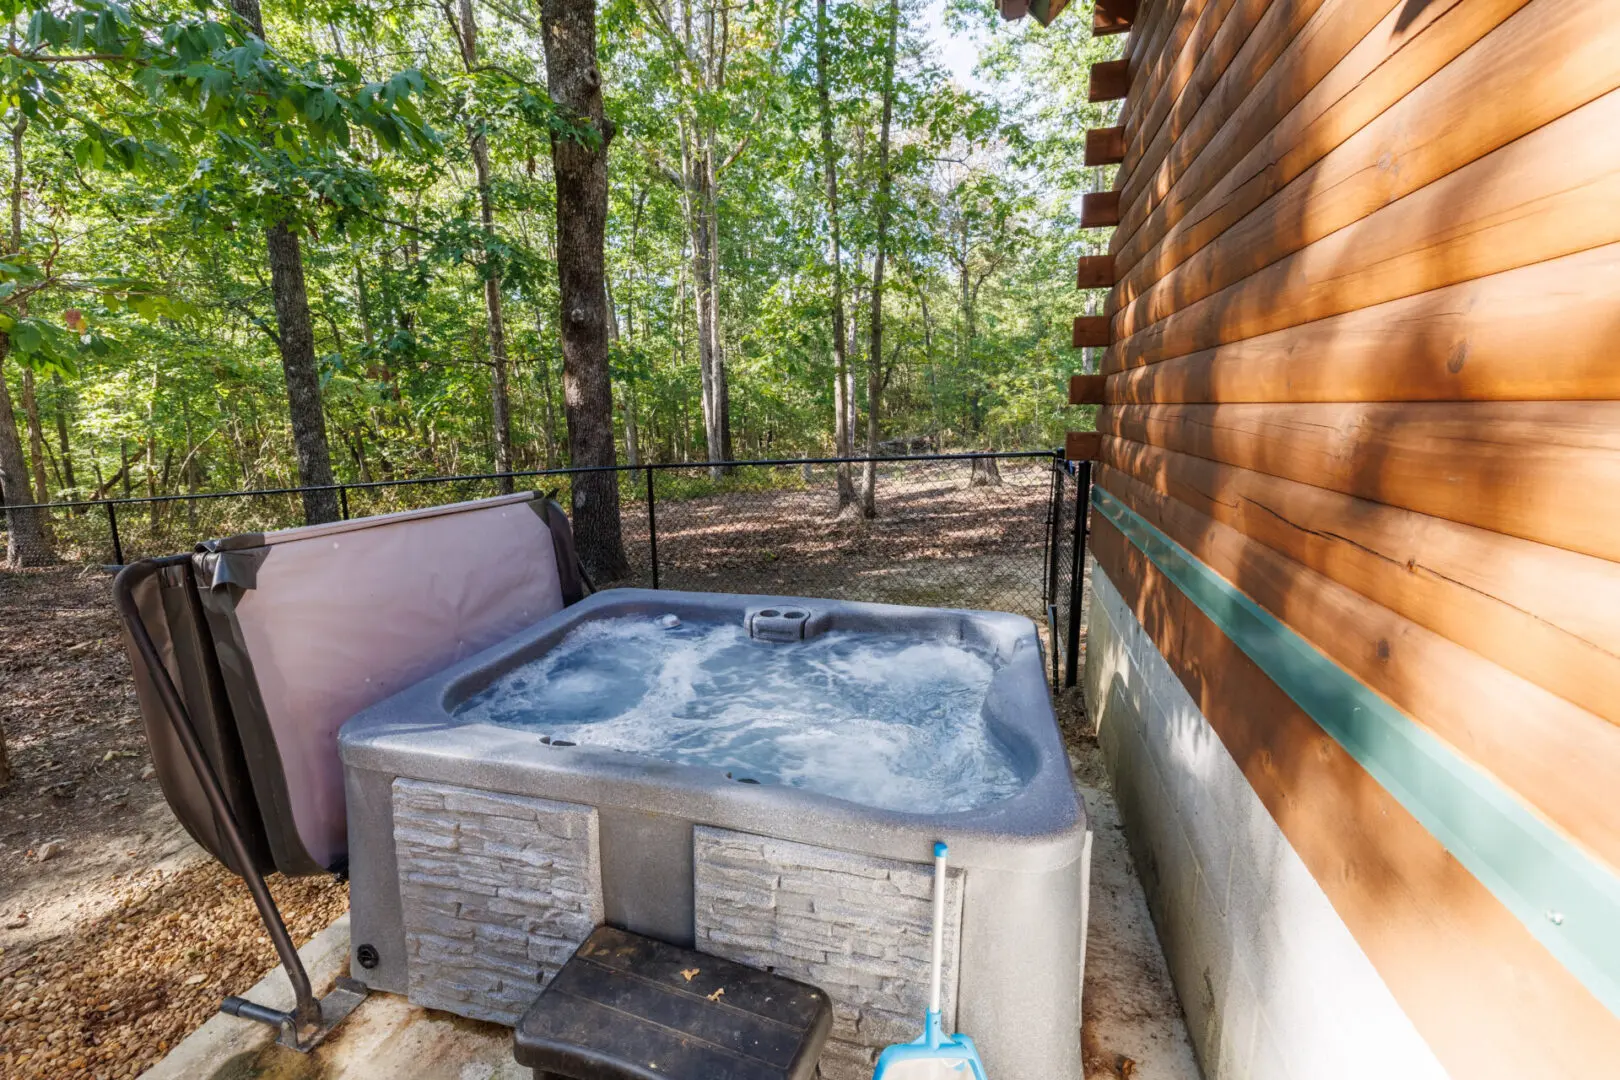 A hot tub in the woods next to a cabin.